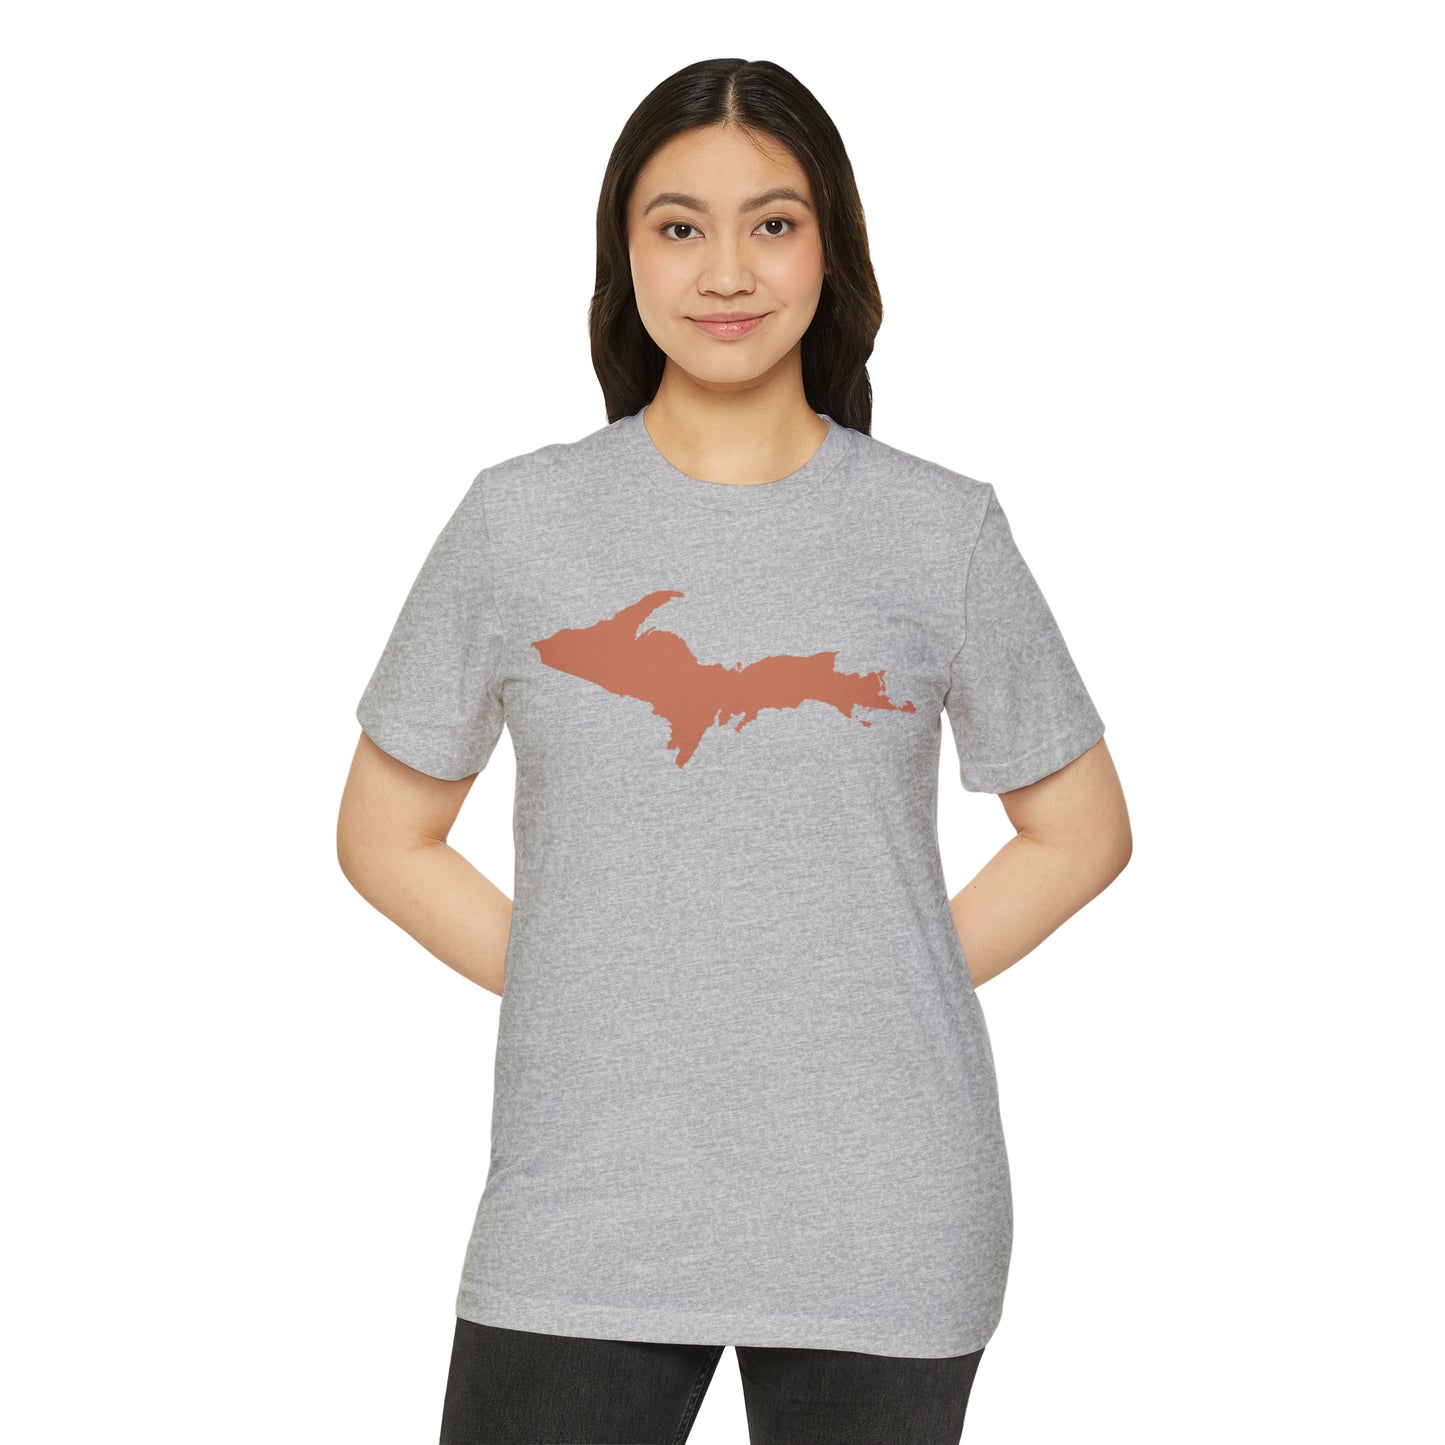 Michigan Upper Peninsula T-Shirt (w/ Copper UP Outline) | Unisex Recycled Organic